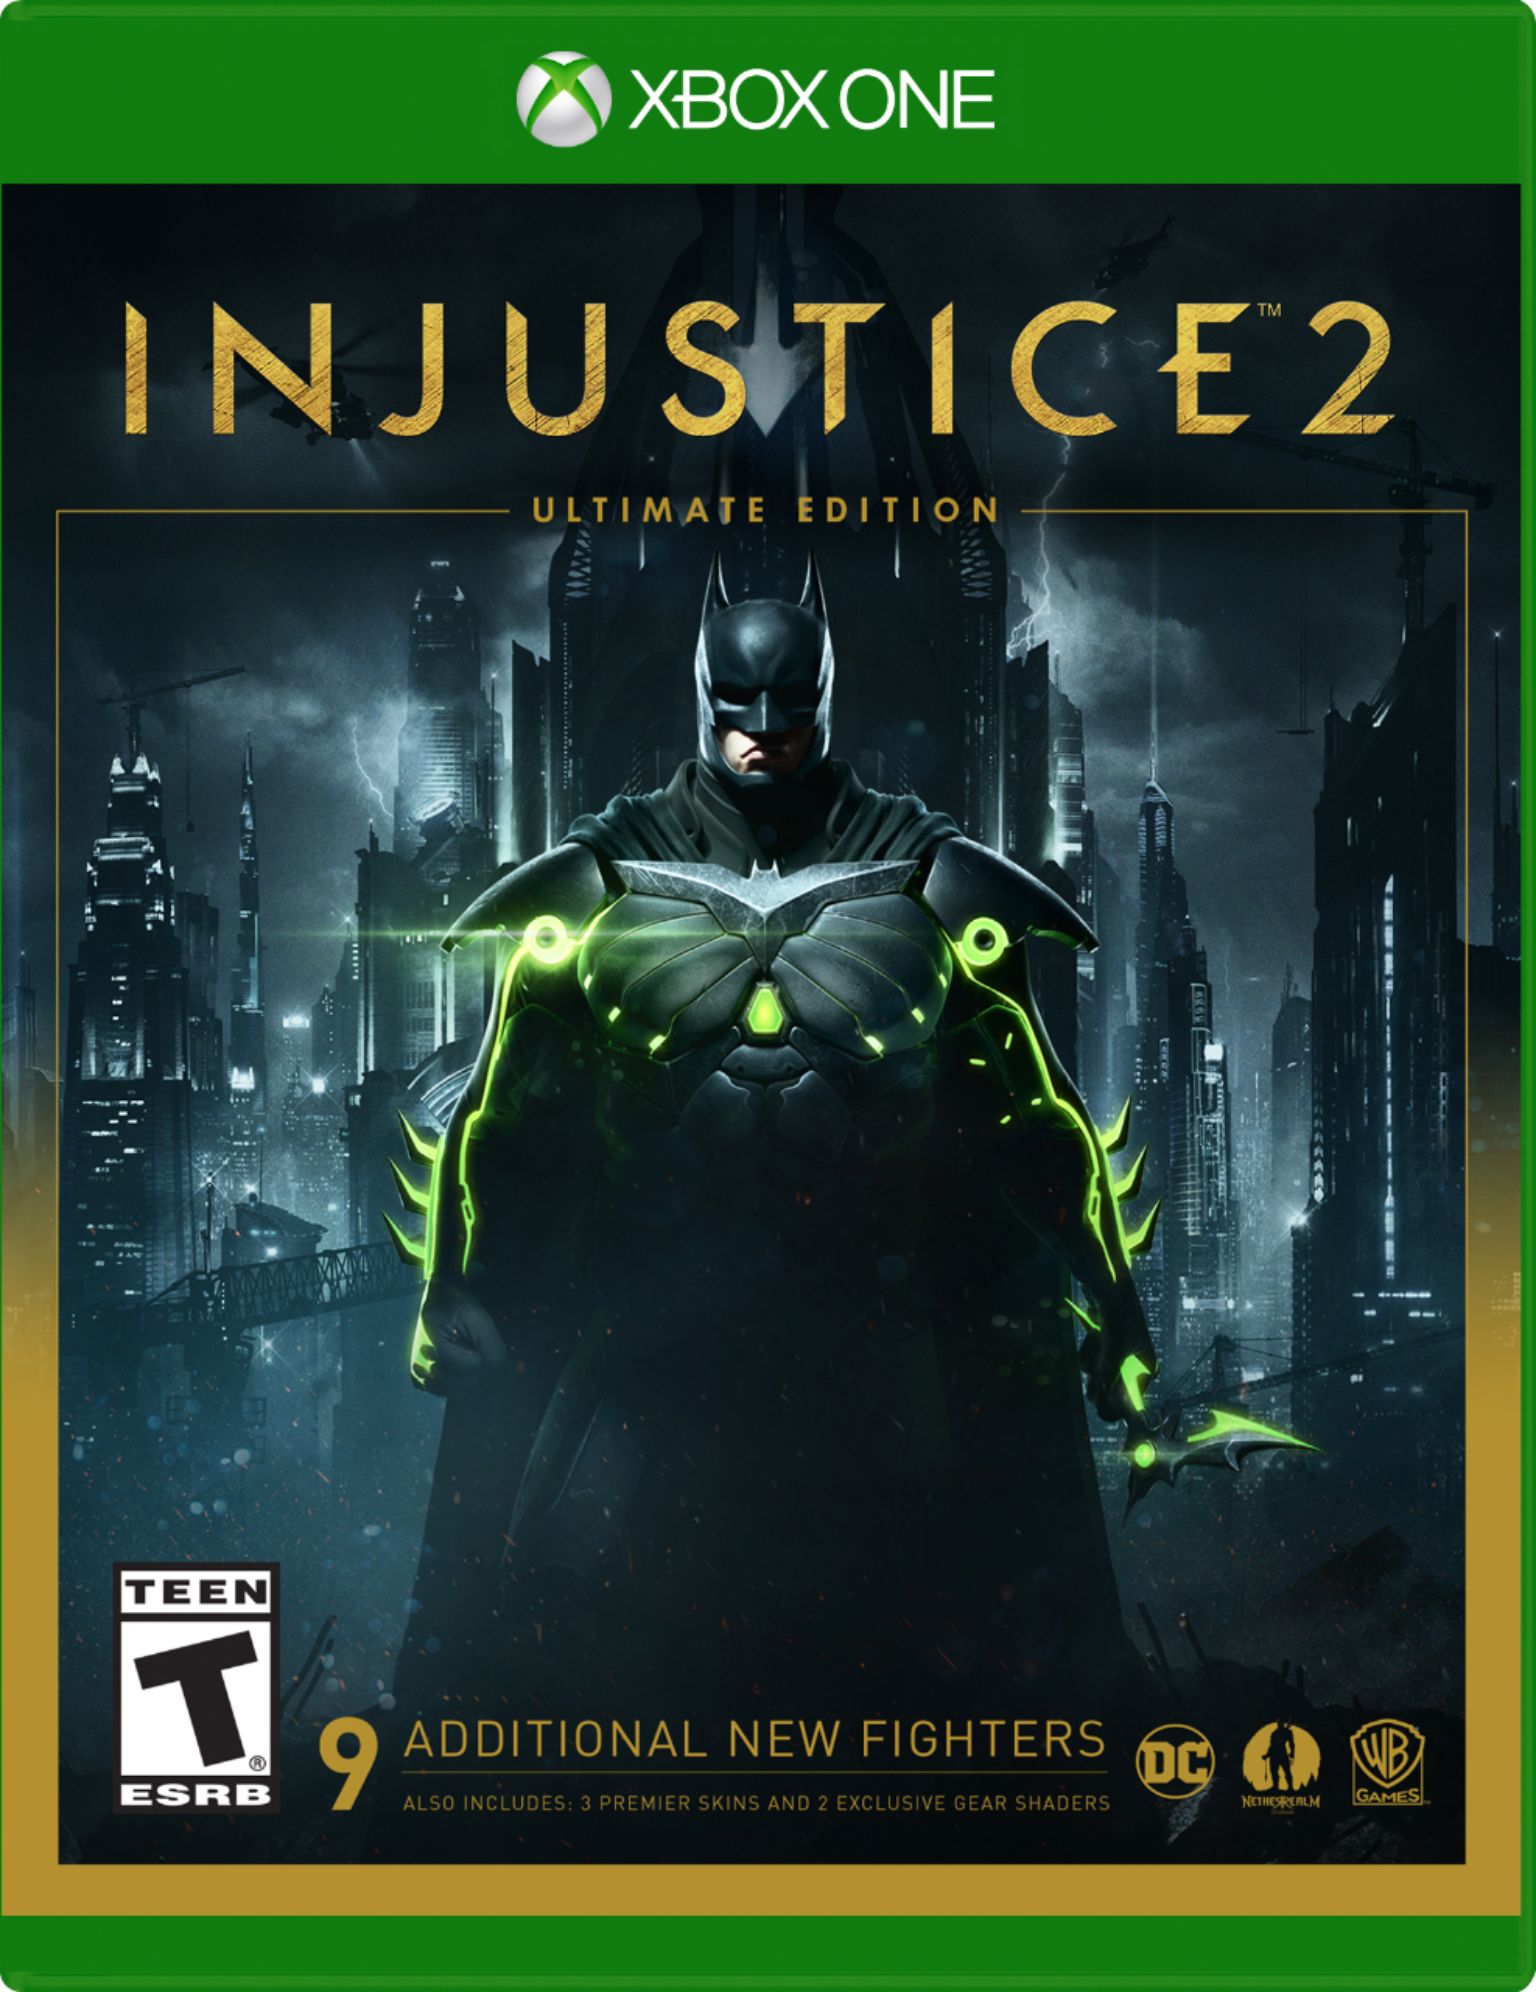 Injustice: Gods Among Us (Ultimate Edition) - Xbox 360 [Pre-Owned